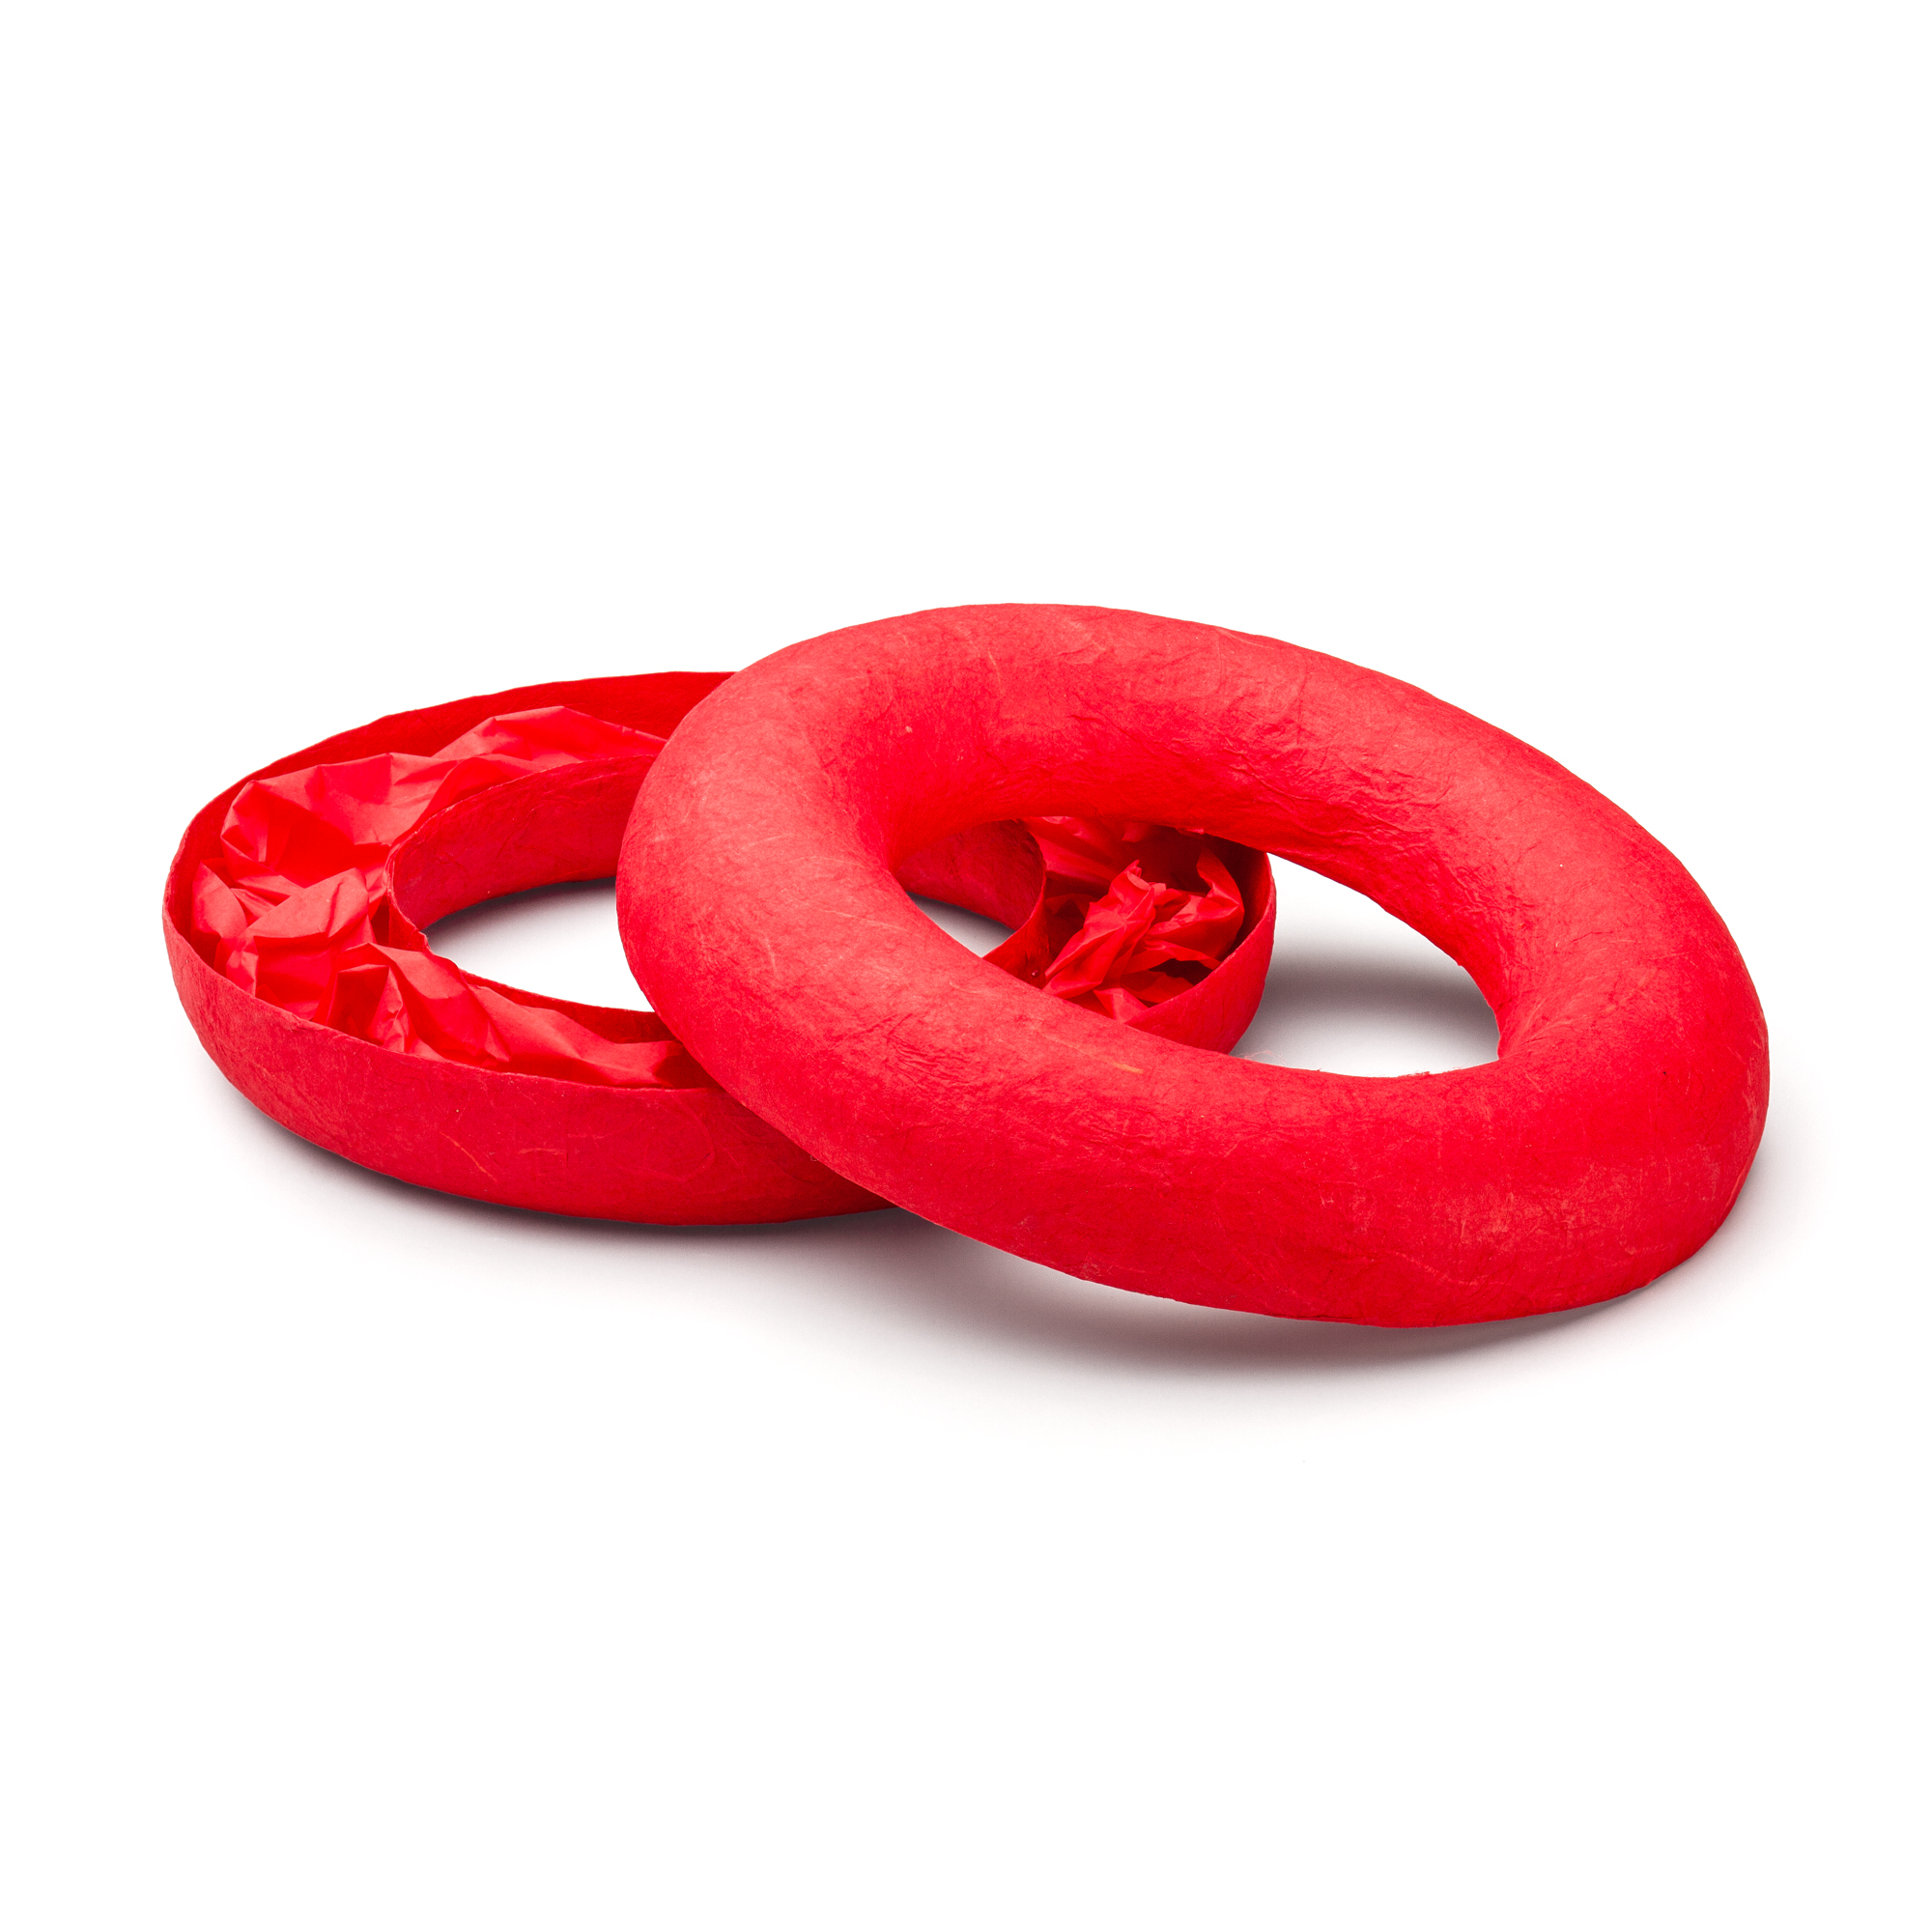 DONUT large red